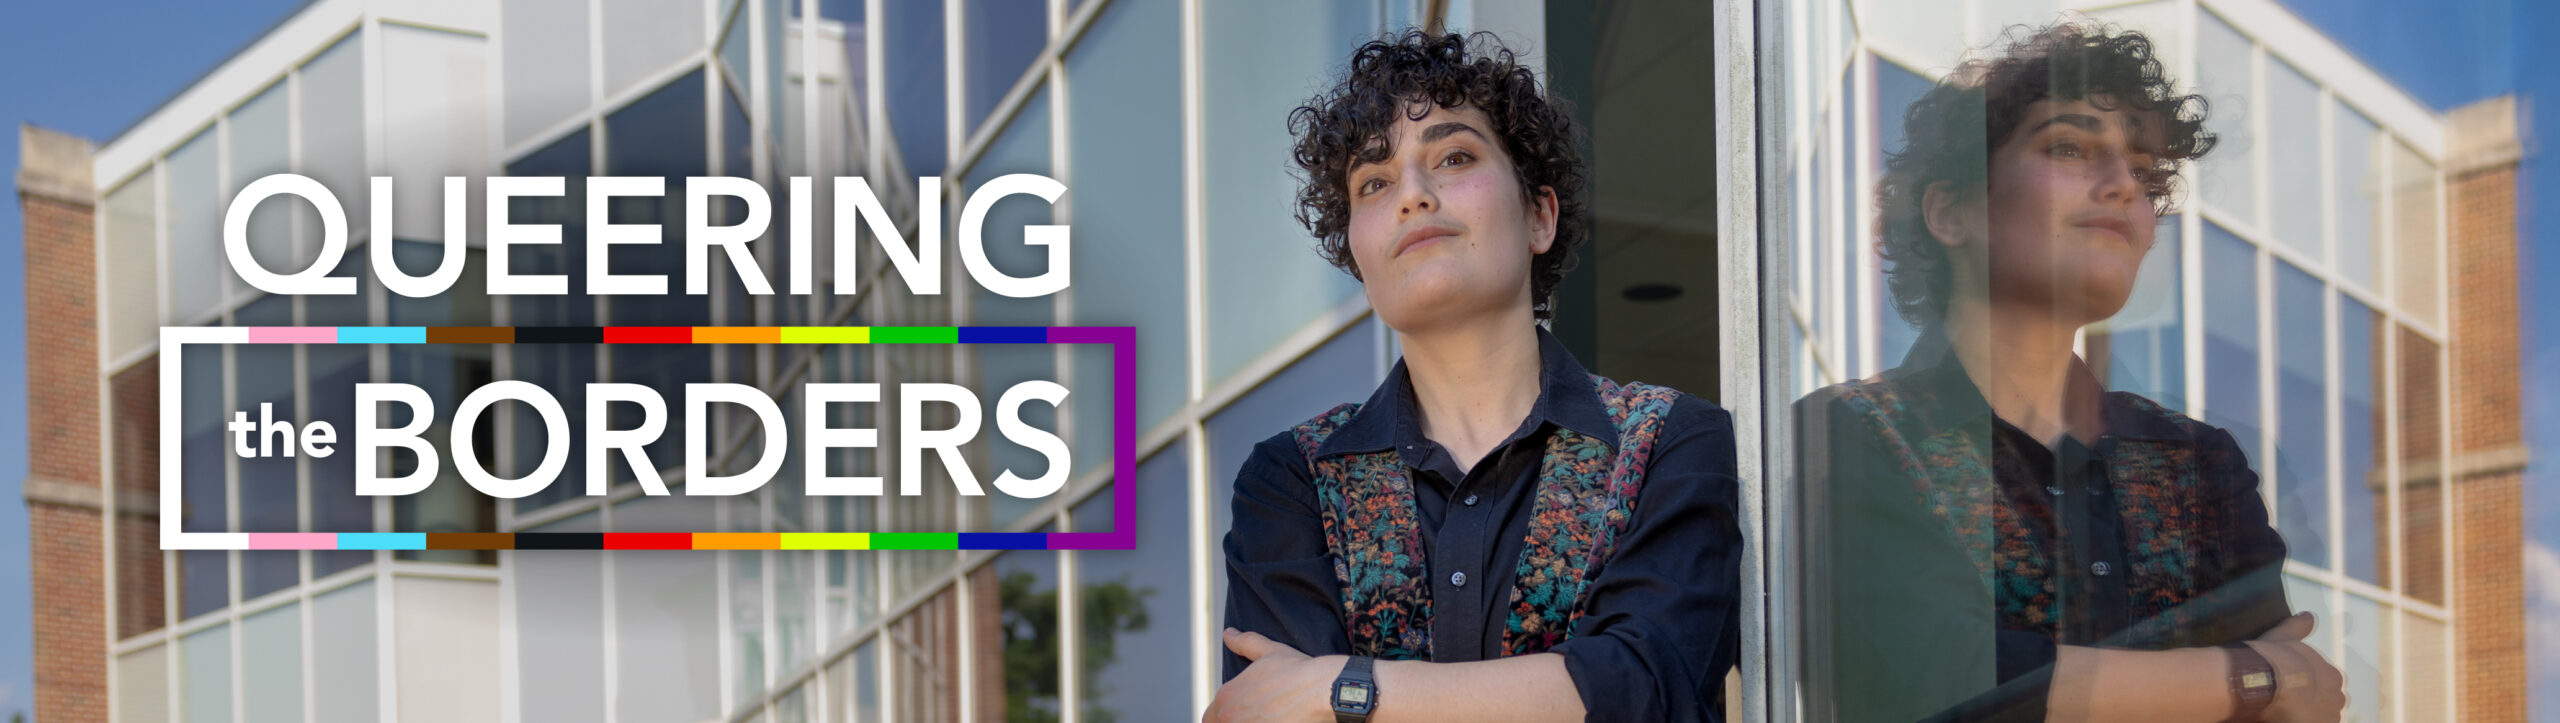 Main feature banner for a story called "Queering the Borders" Image shows Suad Jabr, a UNC PhD student in the geography department studying the media's portrayal of LGBTQIA+ refugees fleeing the Middle East. Click the banner for more information.